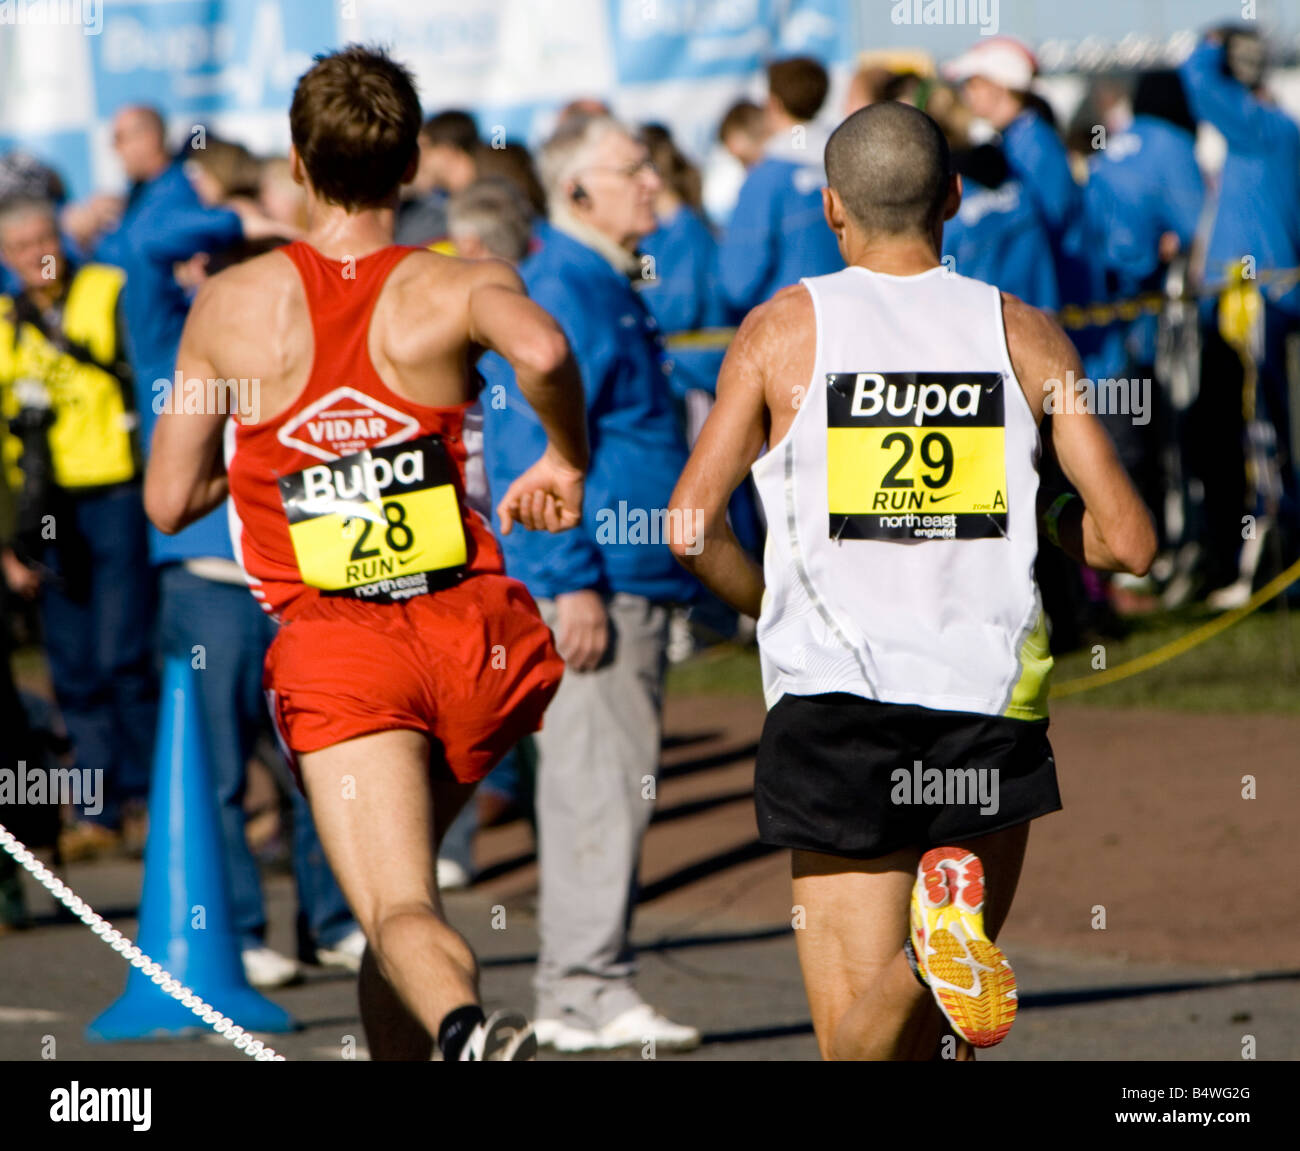 Runners Oystein Sylta (left) and Luis Feiteira competing 2008 Bupa Great North Run. Stock Photo